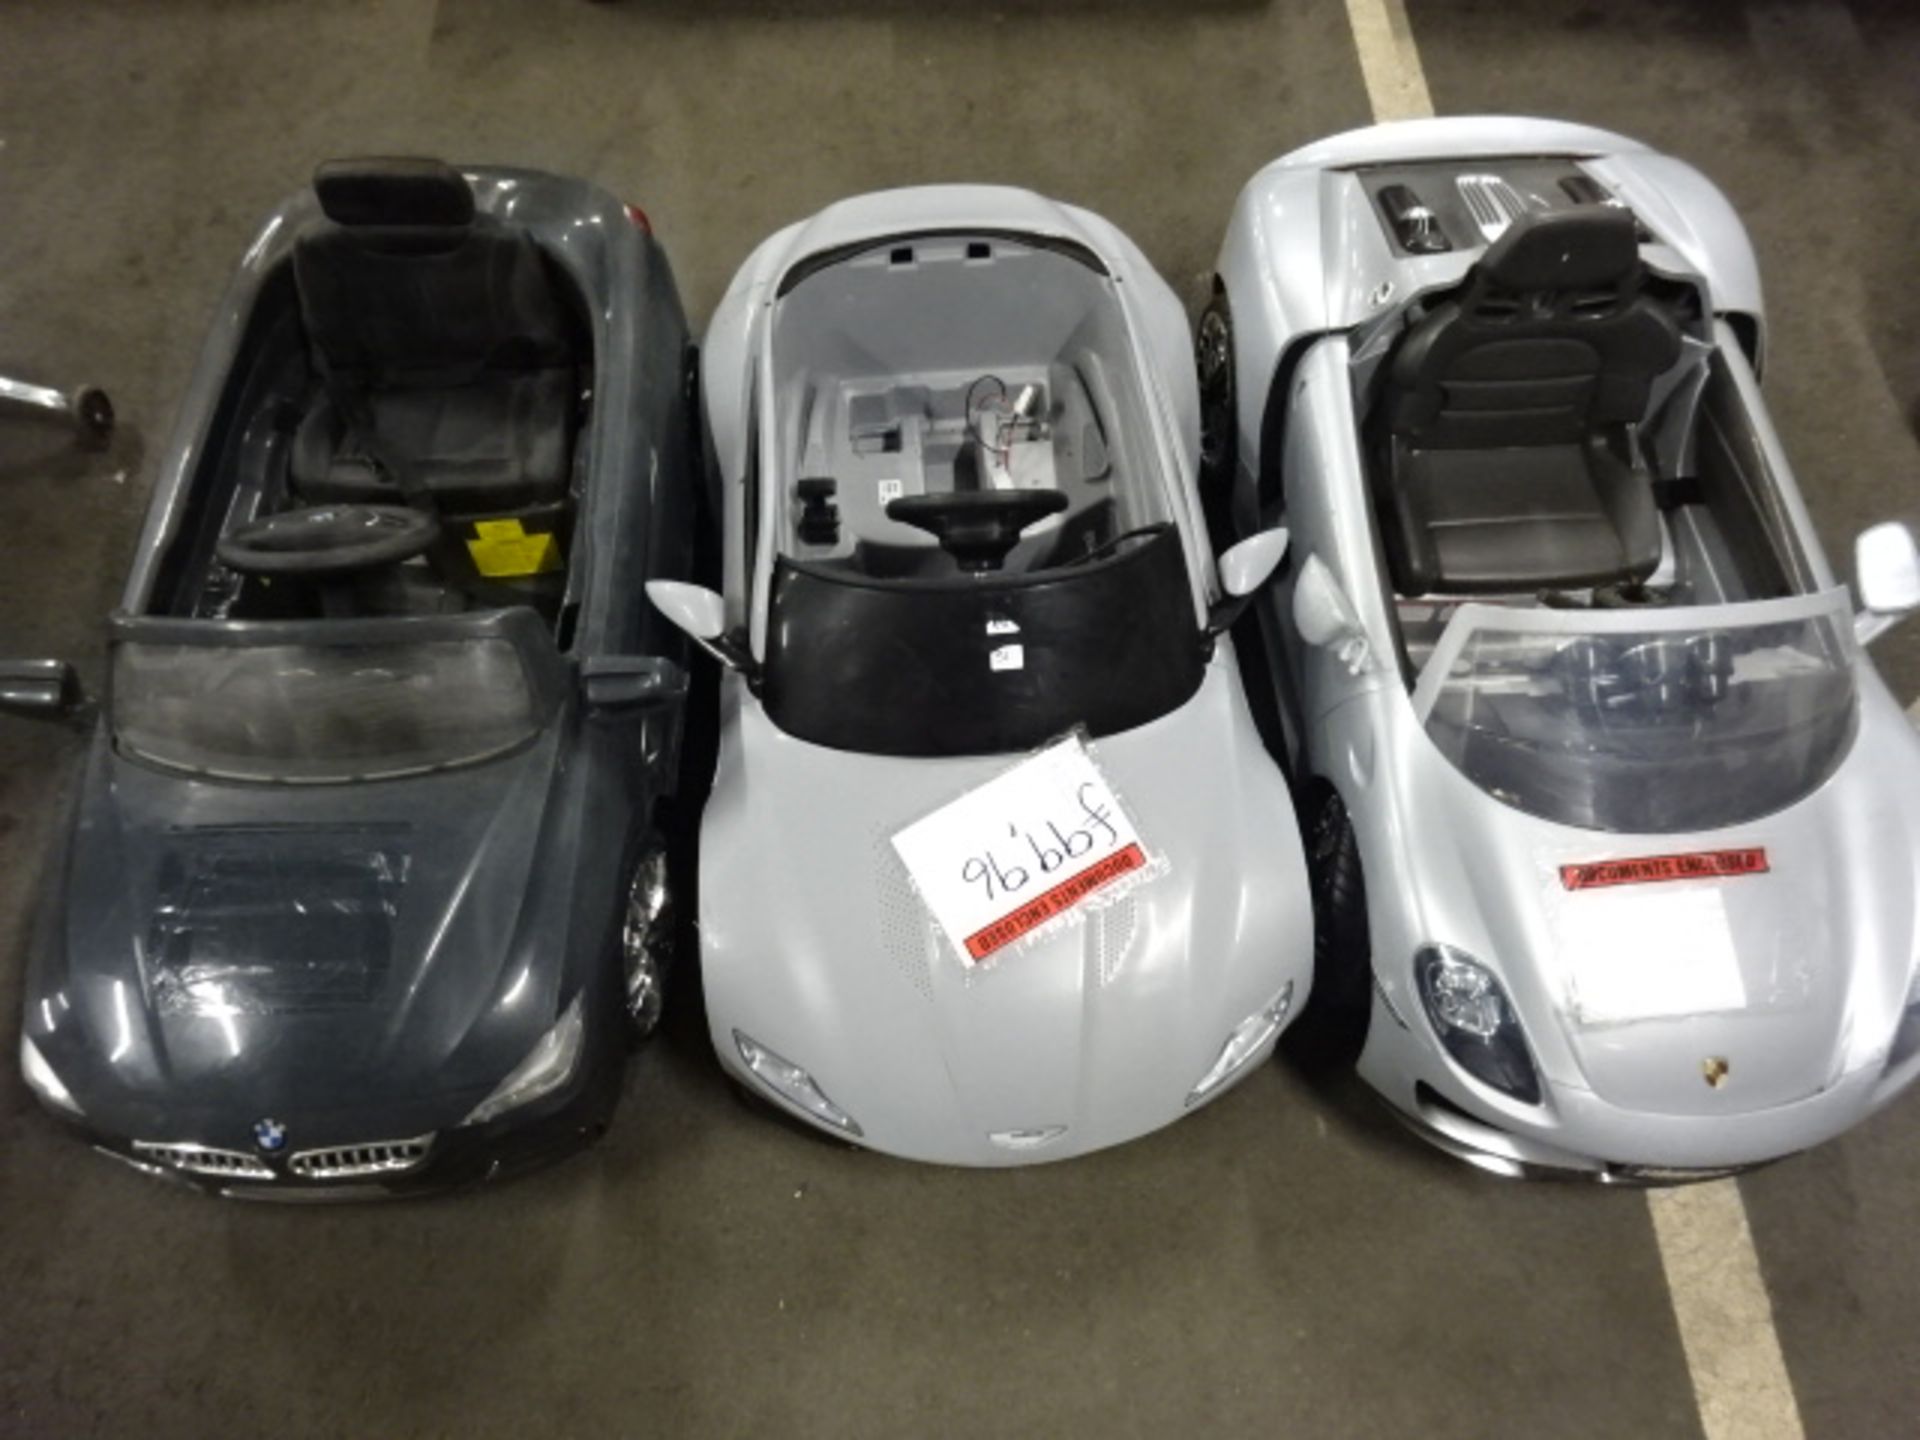 3 UNTESTED CHILDS ELECTRIC CARS (ASTON, BMW &PORCHE) - NO CHARGERS